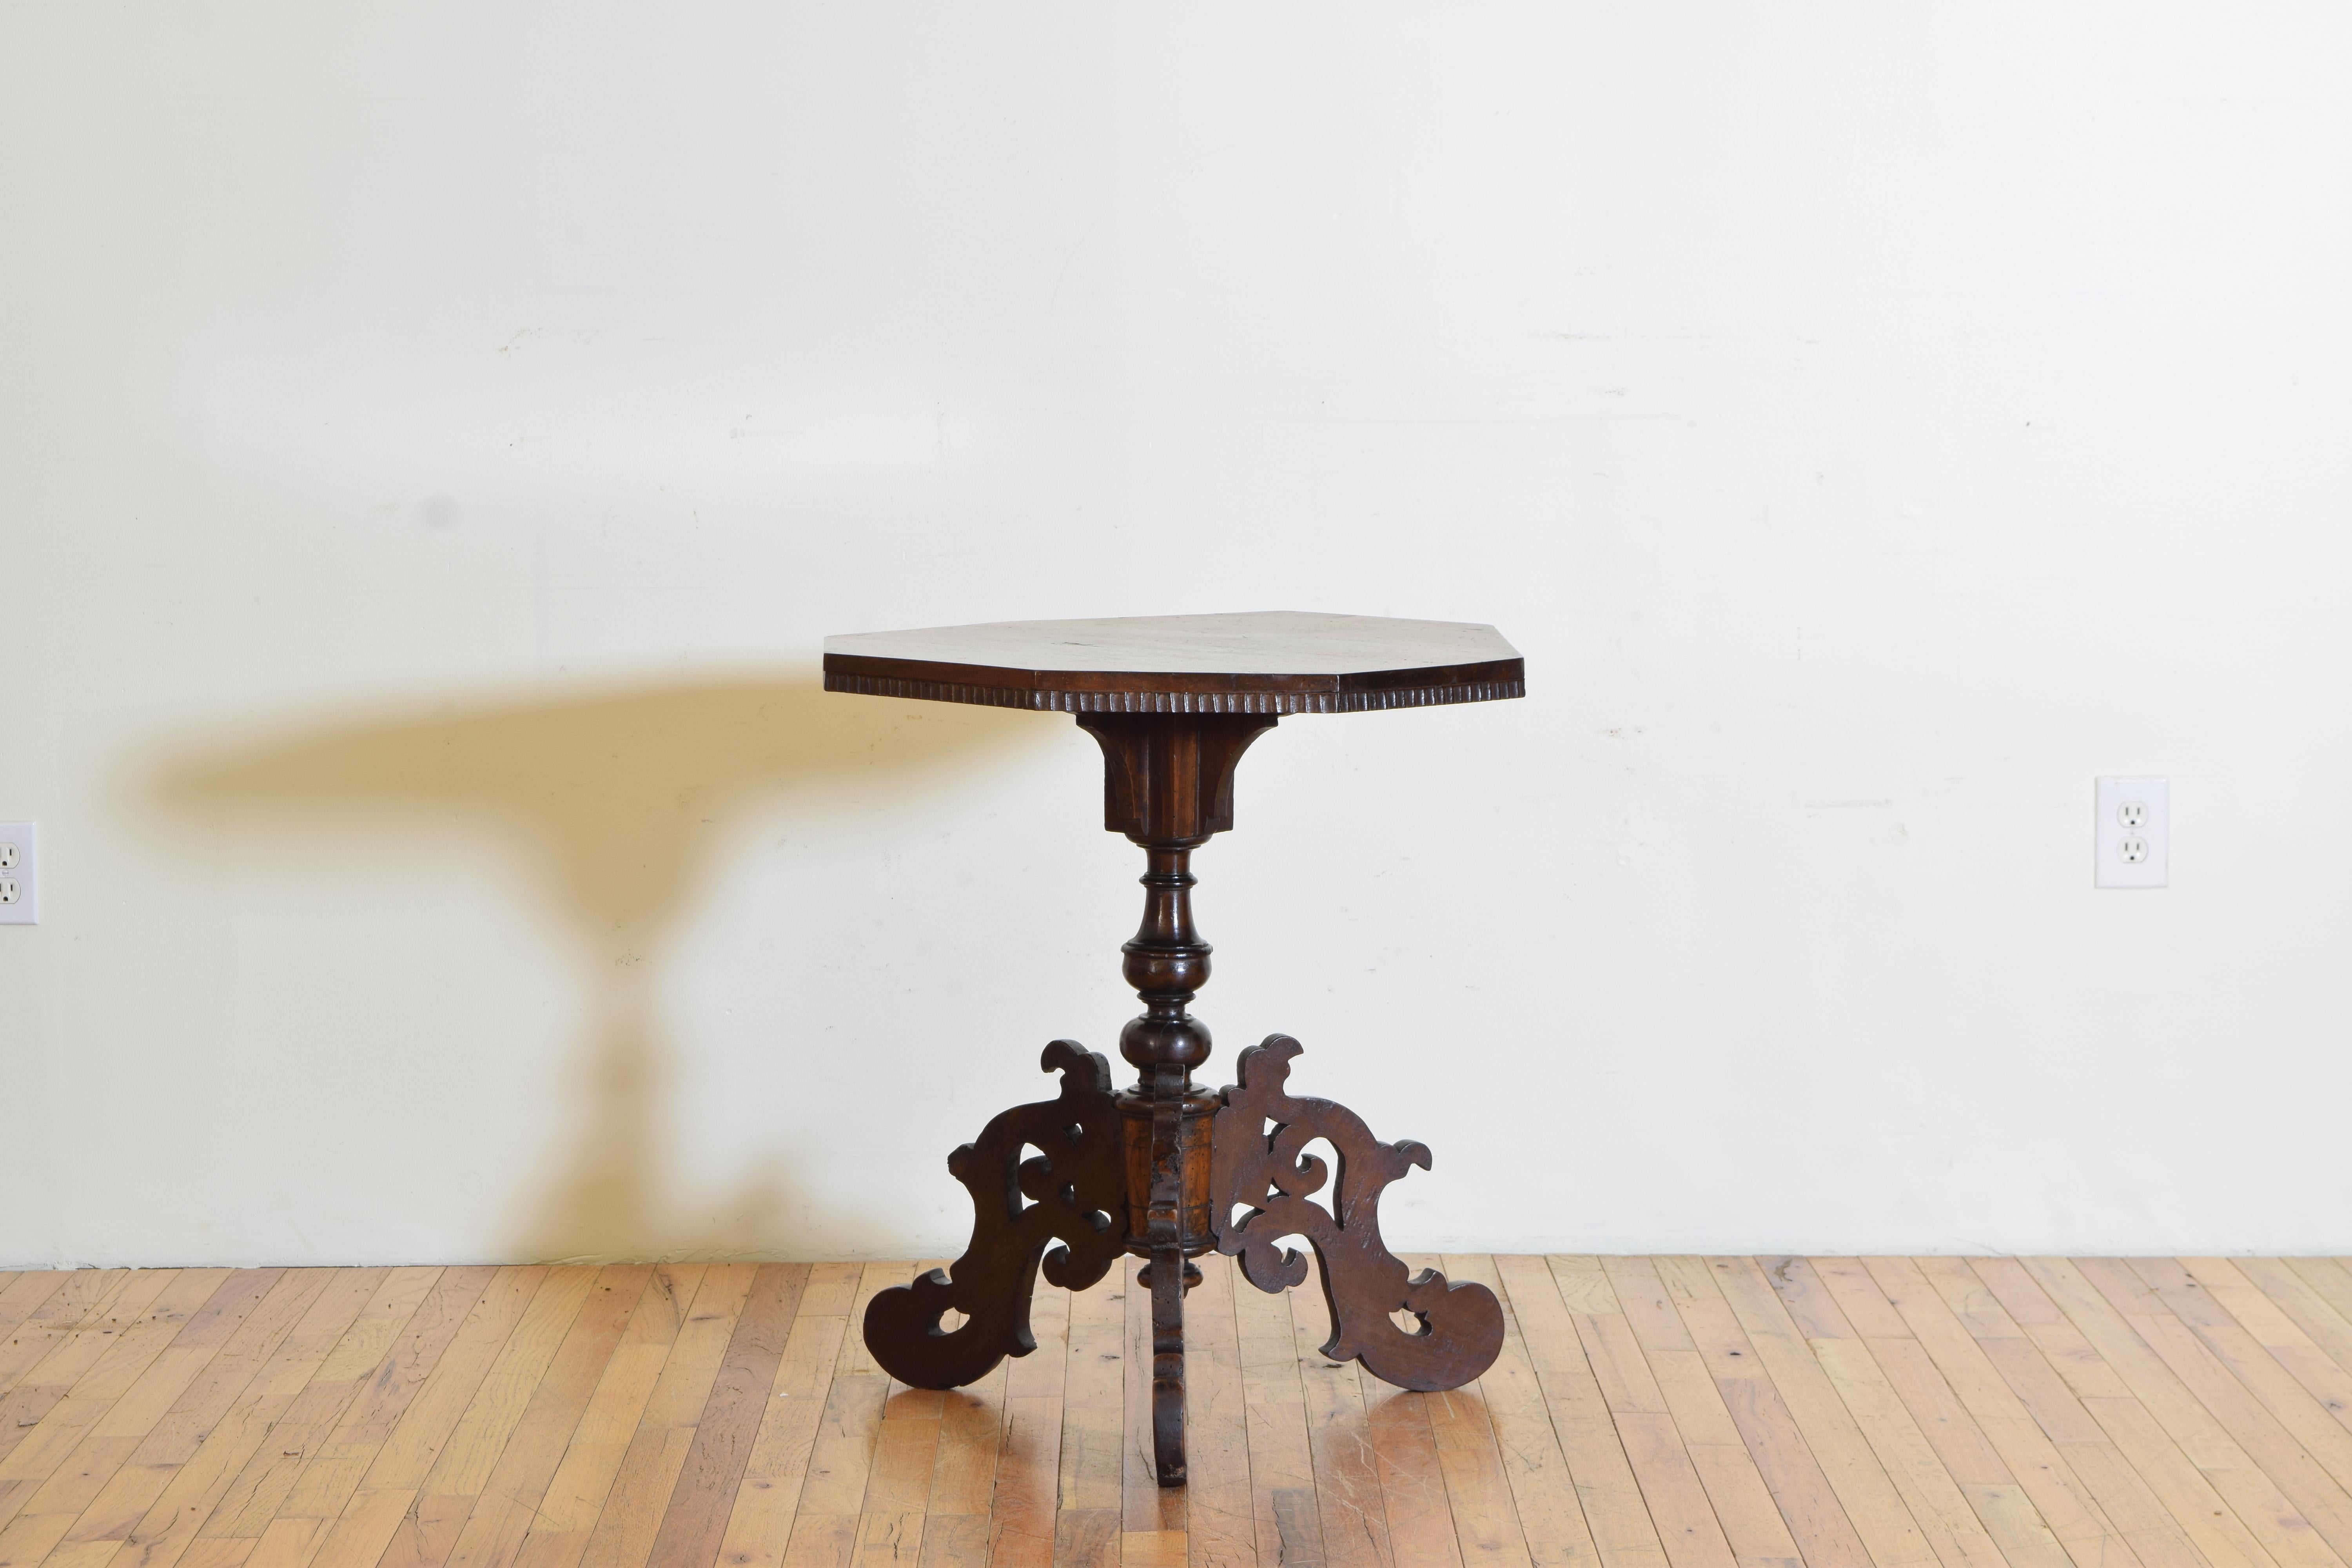 Italian Baroque Shaped & Carved Walnut Octagonal Center Table, Late 17th Century 1